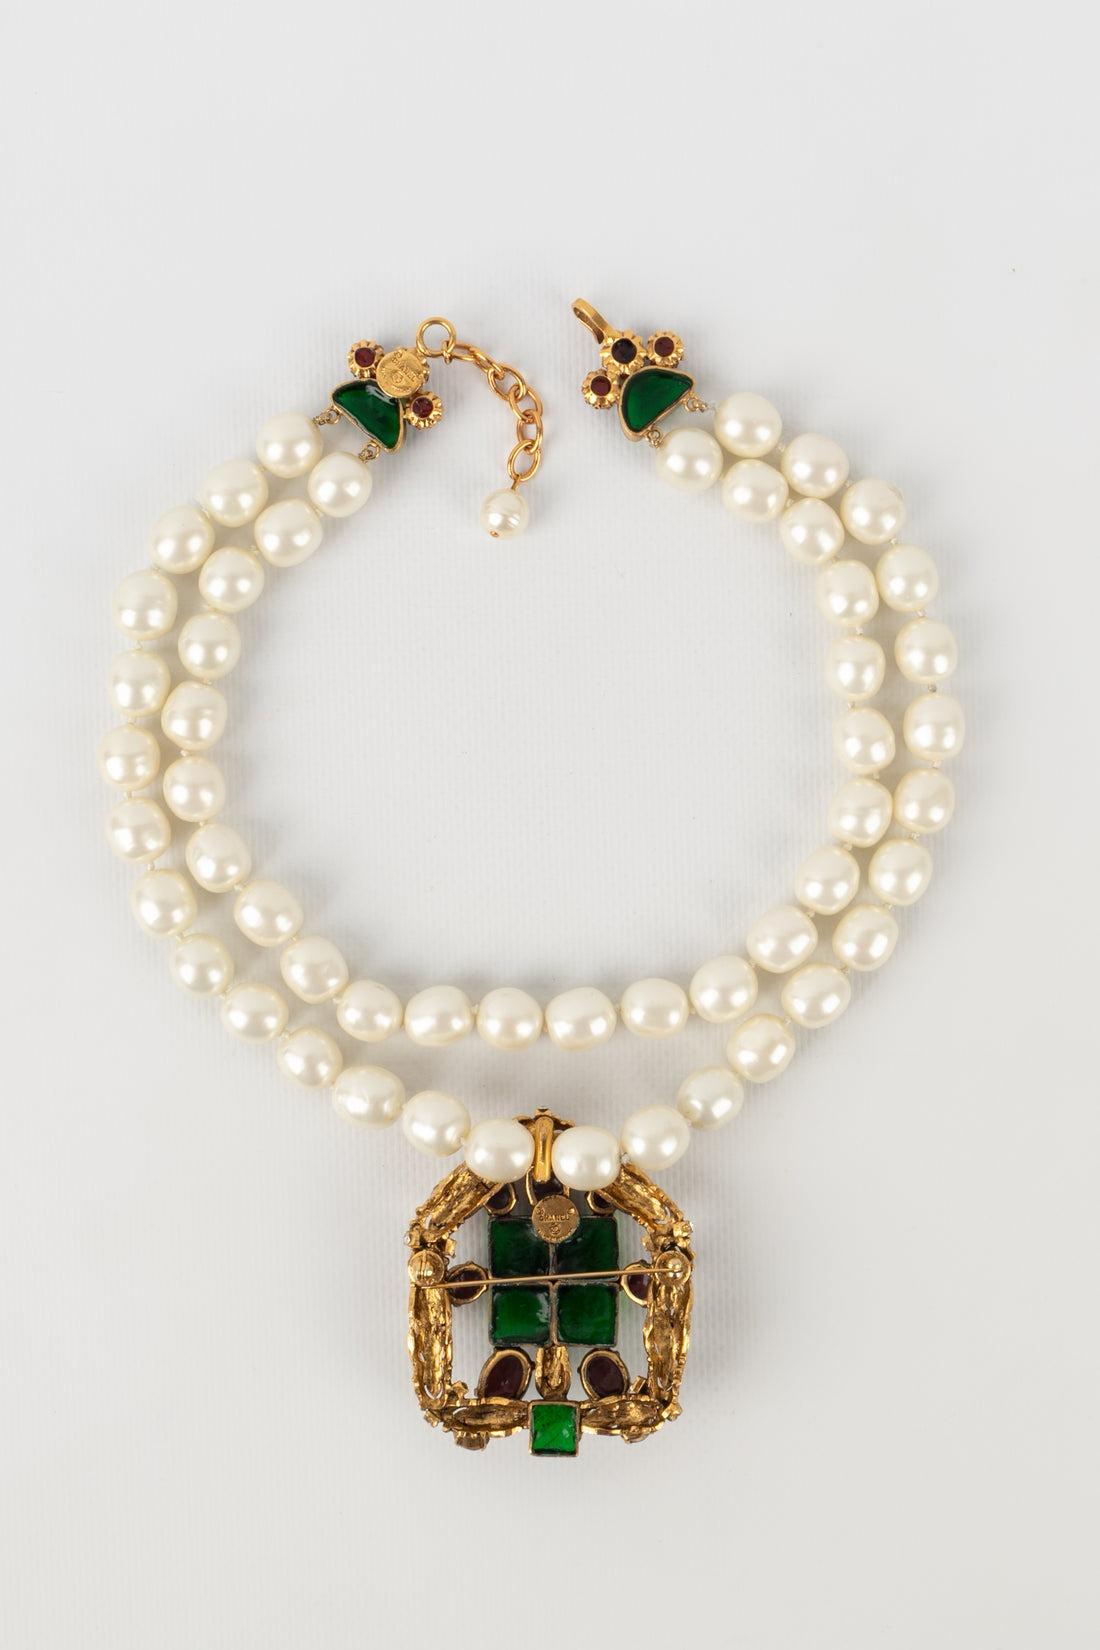 Chanel - (Made in France) Necklace with two rows of costume pearls, a golden metal brooch pendant, glass paste, and rhinestones.

Additional information:
Condition: Very good condition
Dimensions: Length: from 41 cm to 45 cm - Height: 6.5 cm

Seller